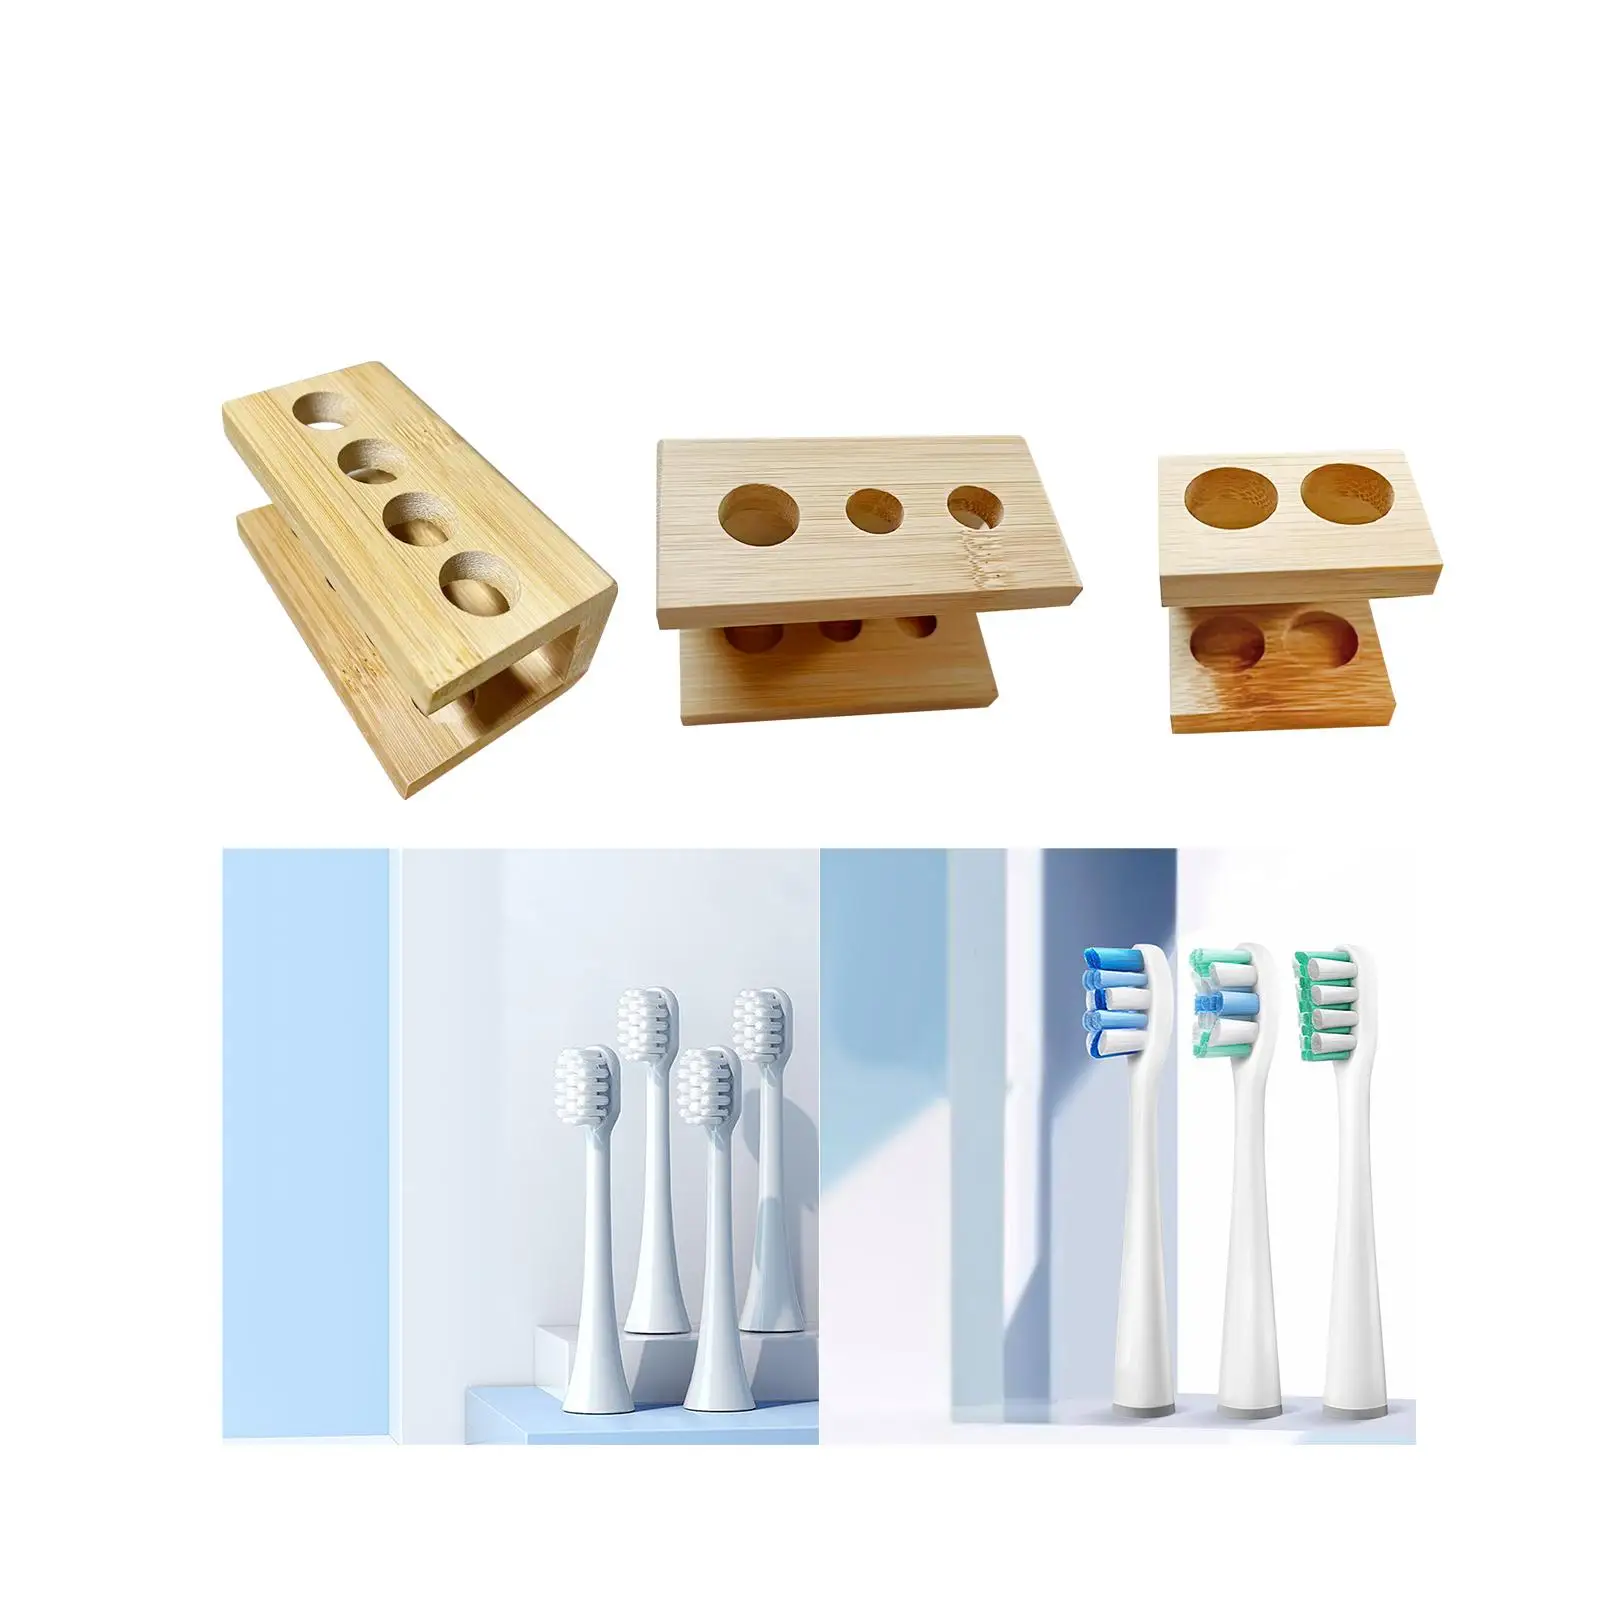 Electric Toothbrush Heads Holder Wood Freestanding Easy to Clean Nonslip Fittings for Bathroom Vanity Countertop Makeup Lotions